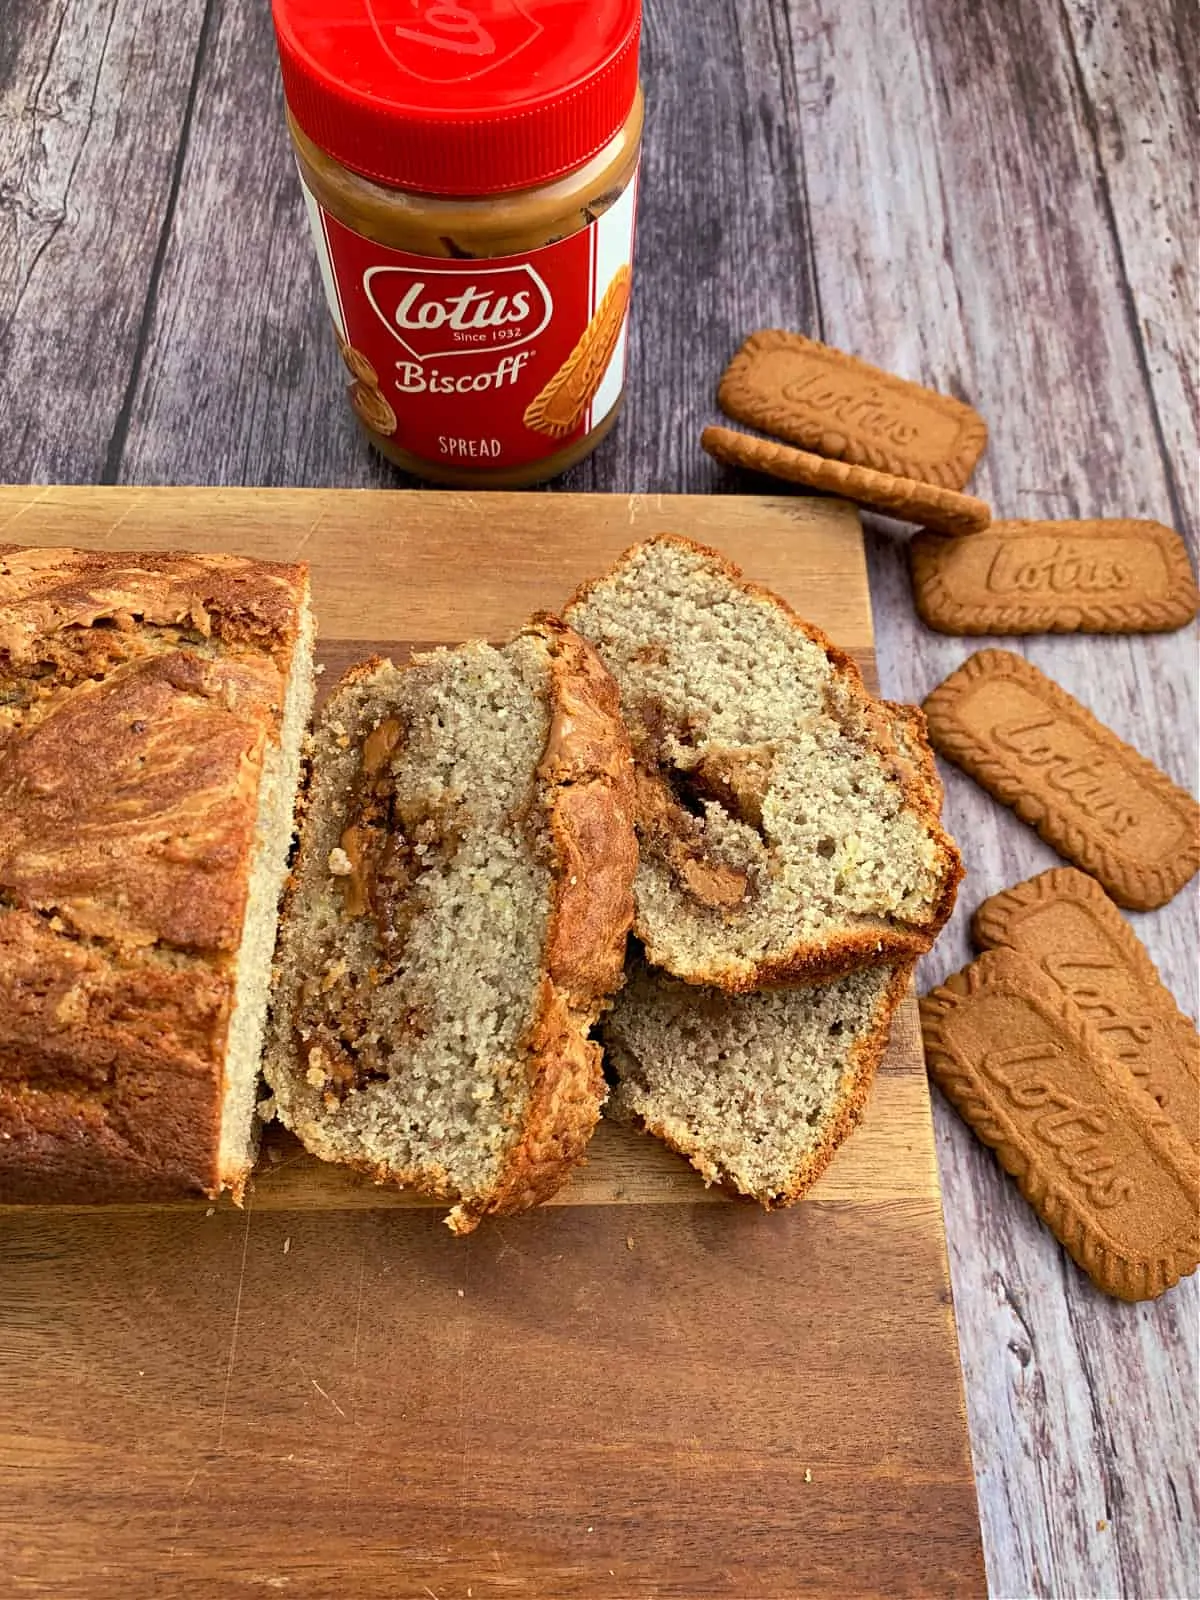 Banana bread with Biscoff spread inside and Biscoff spread and biscuits to the side.